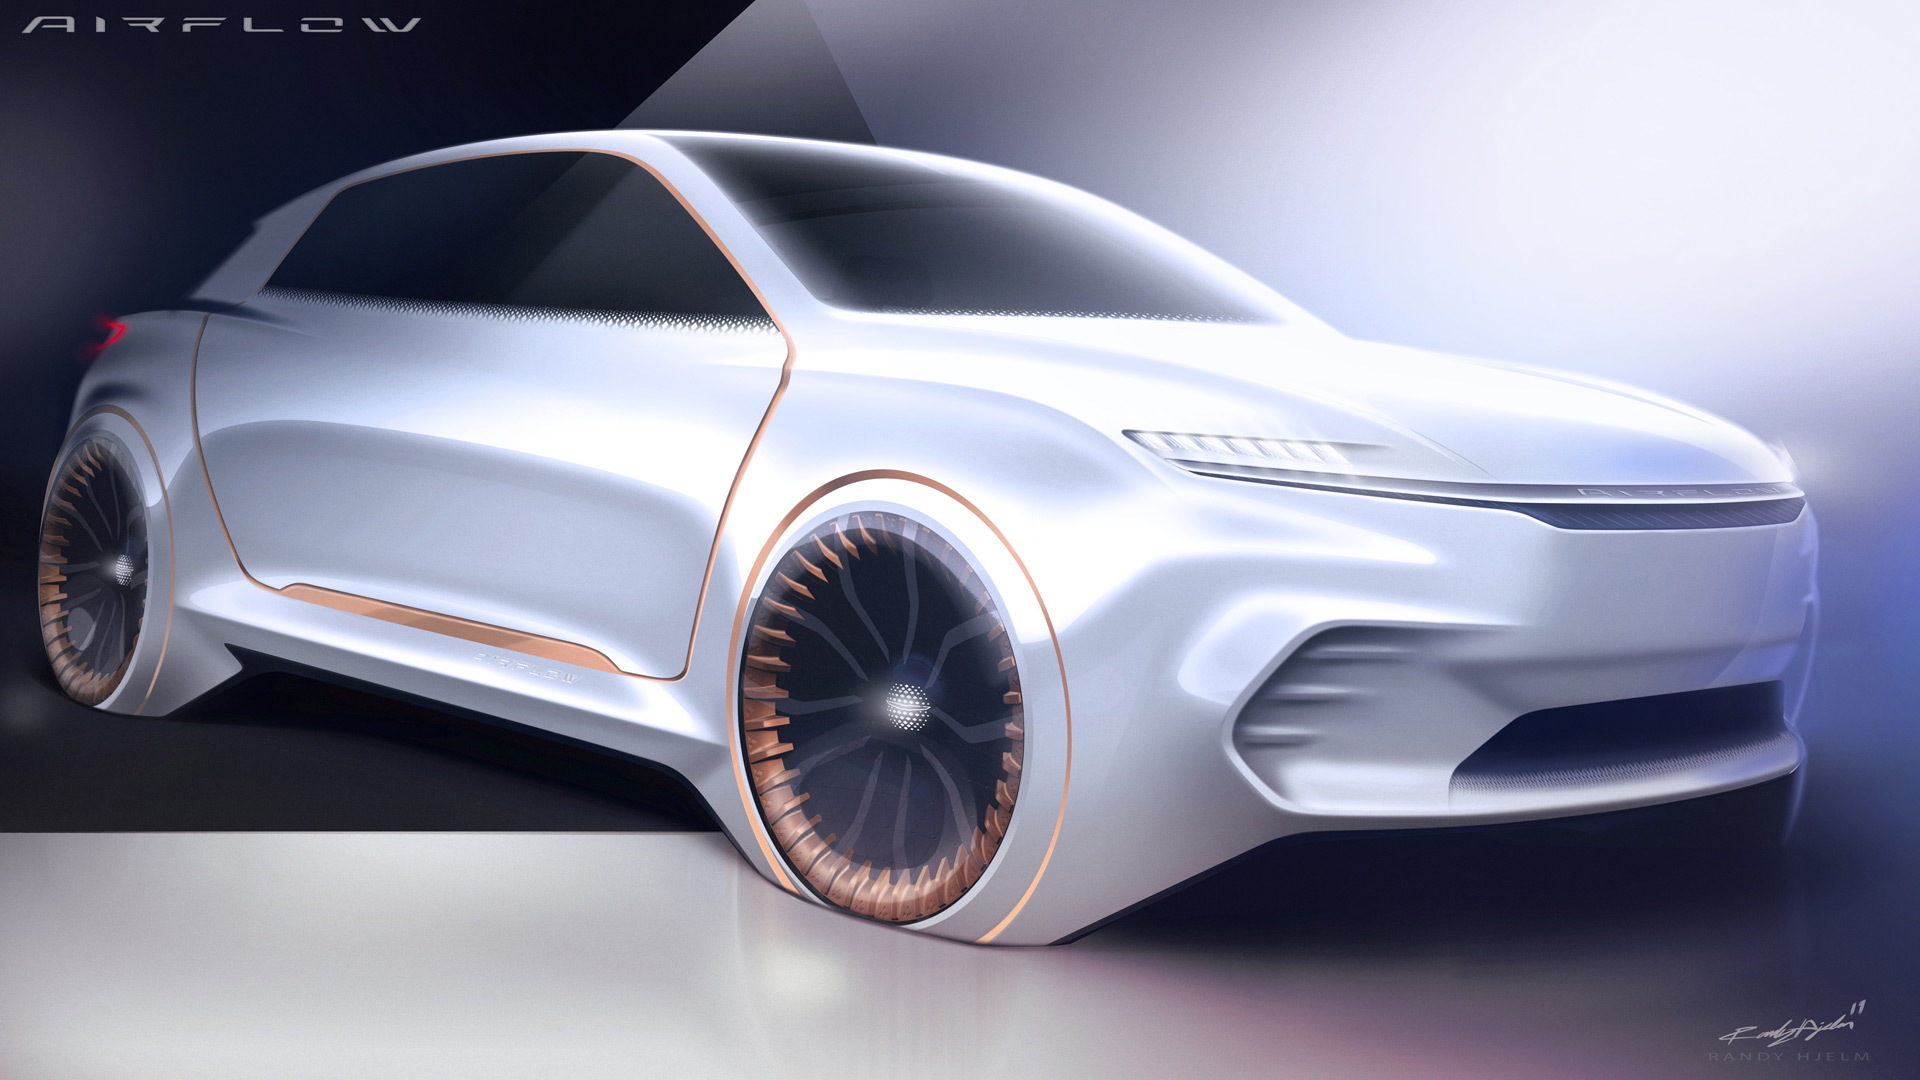 Teaser for Fiat Chrysler Automobiles Airflow Vision concept debuting at 2020 CES